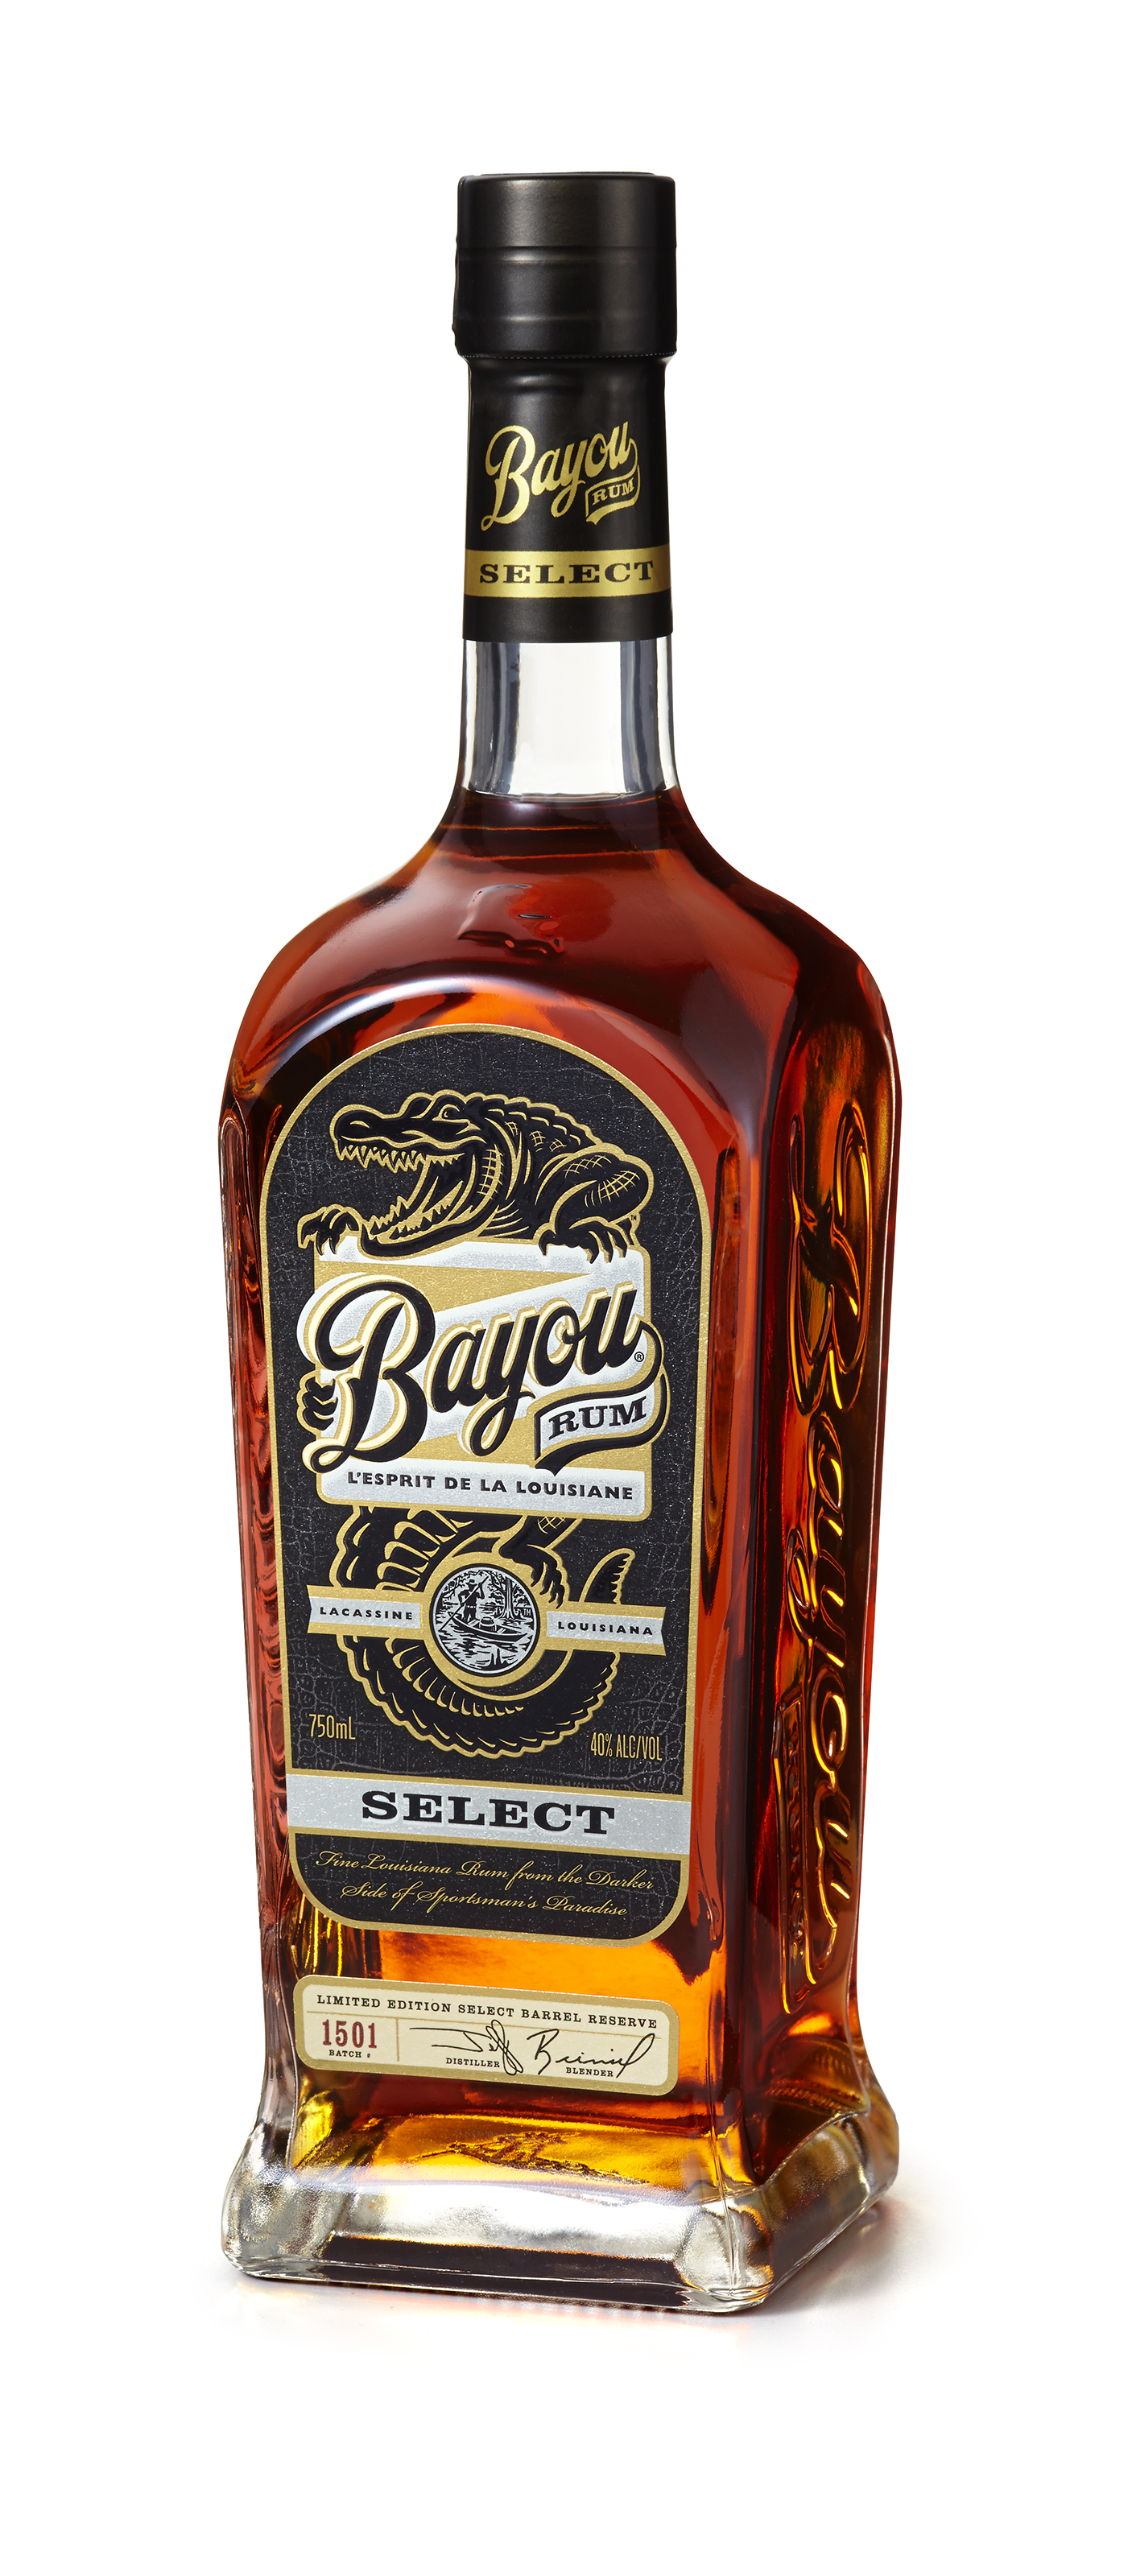 USA Craft Distillery Louisiana Spirits Introduces First Aged Expression Bayou® Select Rum